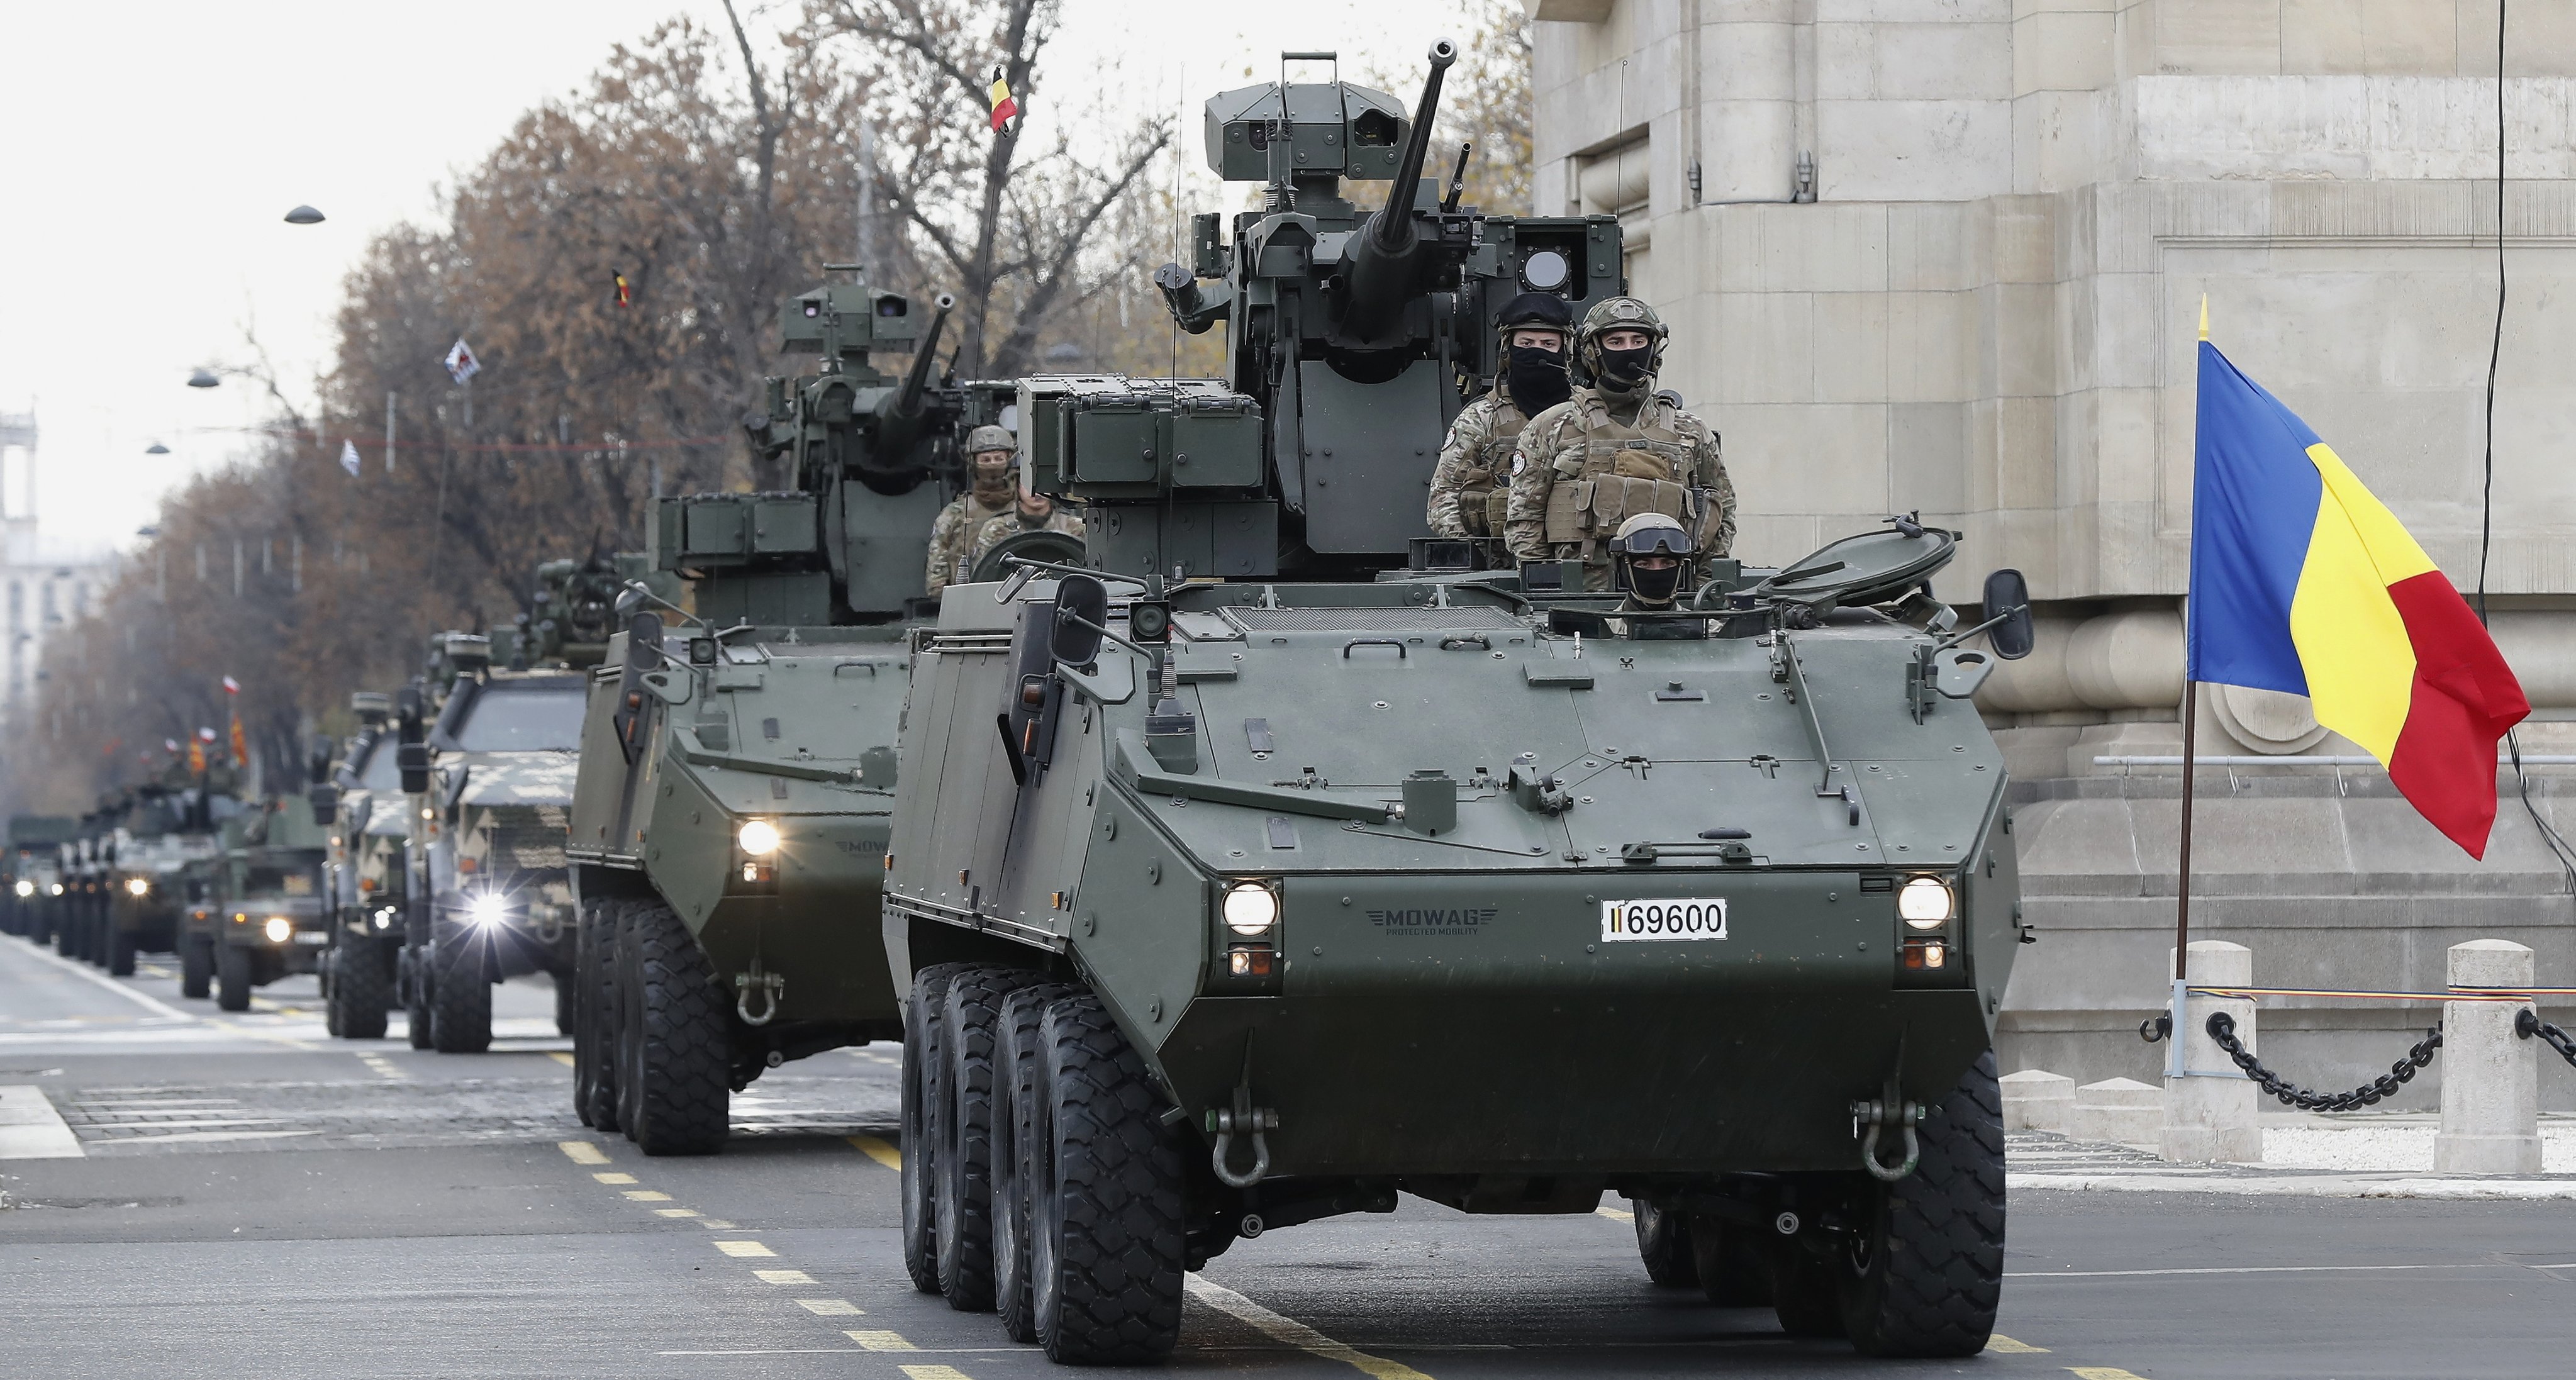 Polish troops deployed to Romania as Nato enforcement take part in a military parade in Bucharest on December 1. Photo: EPA-EFE